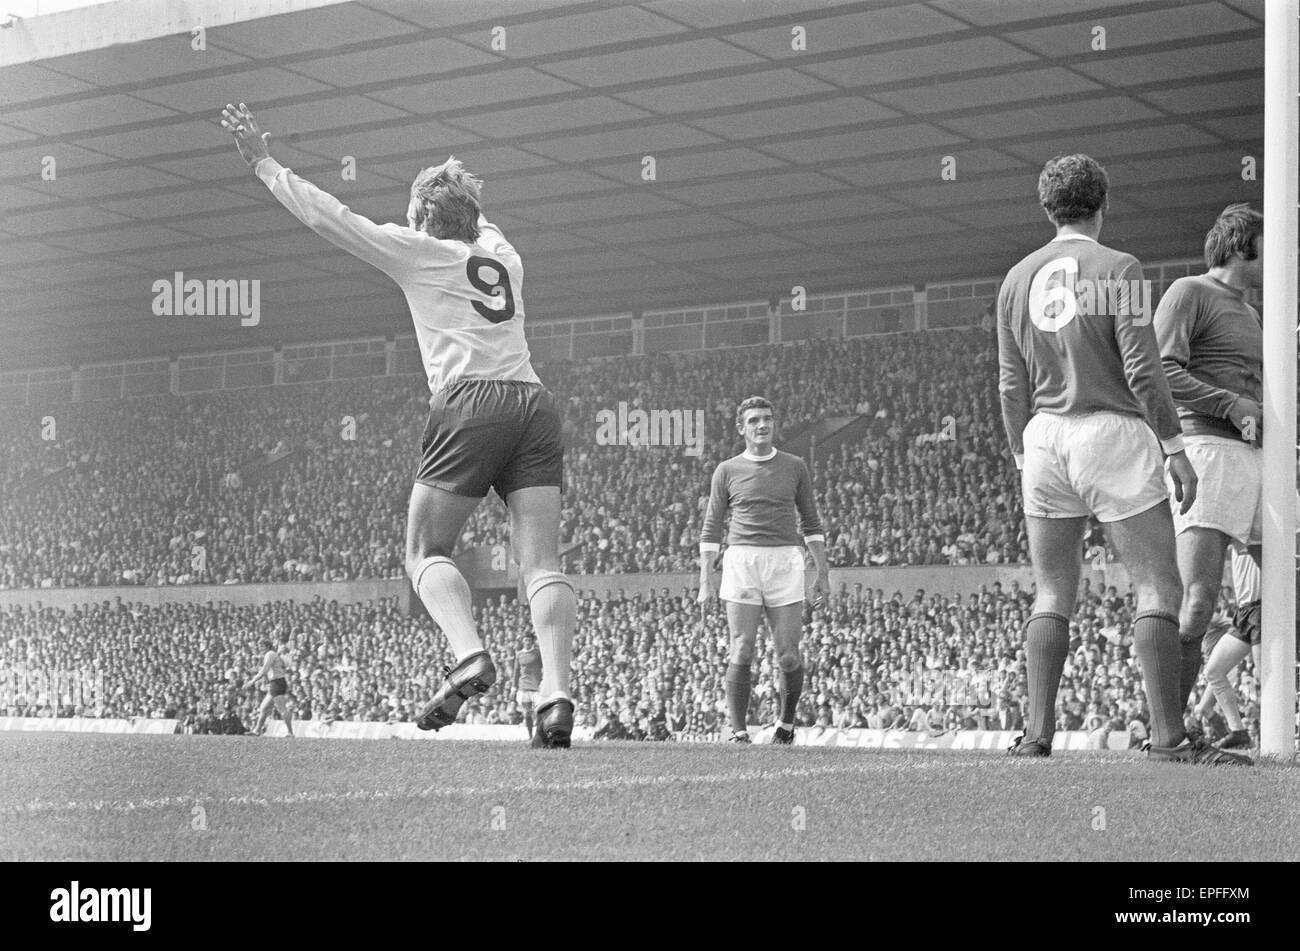 Manchester United 1-4 Southampton-League-Spiel im Old Trafford, Samstag, 16. August 1969. Stockfoto